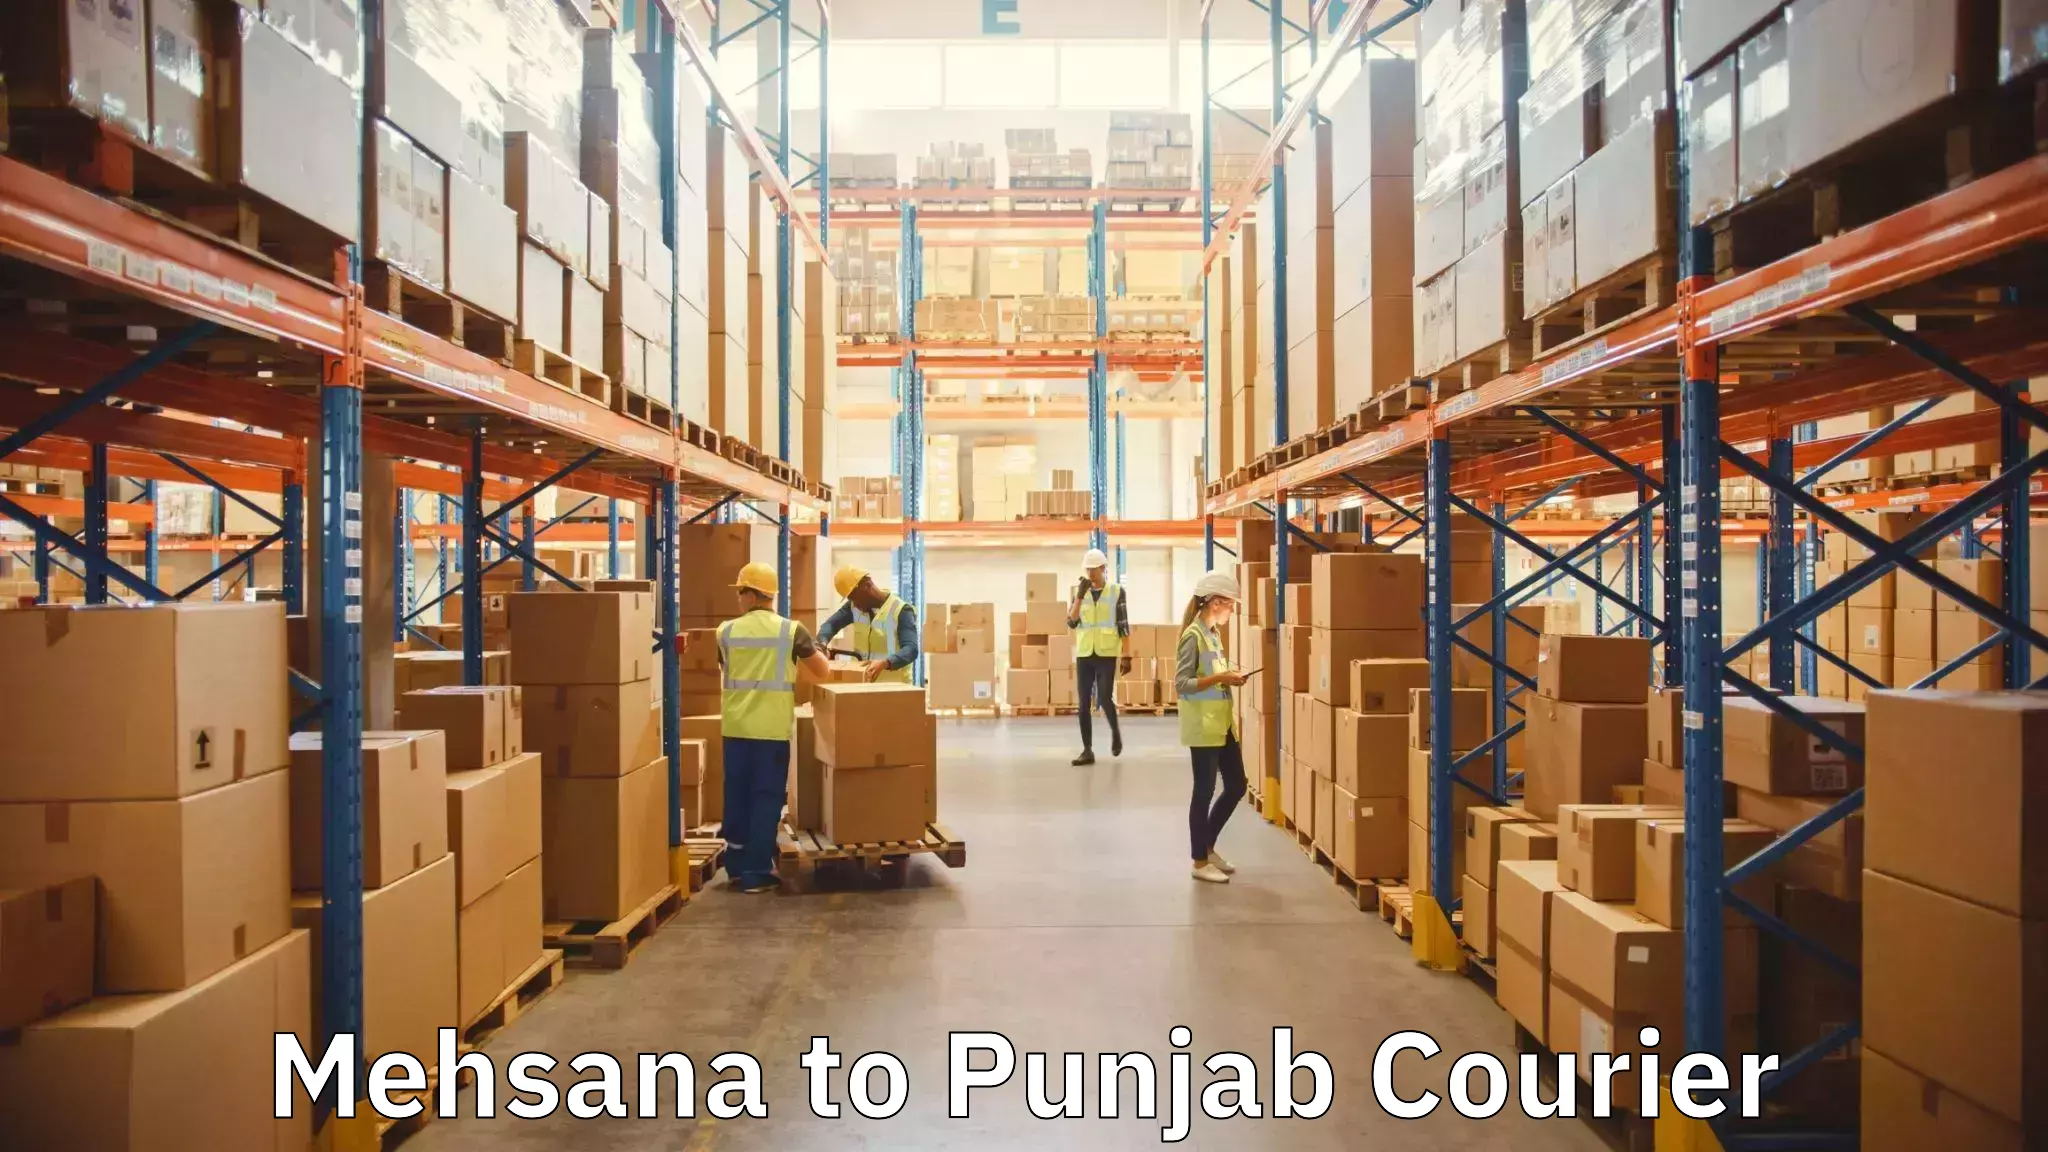 Moving and storage services Mehsana to Punjab